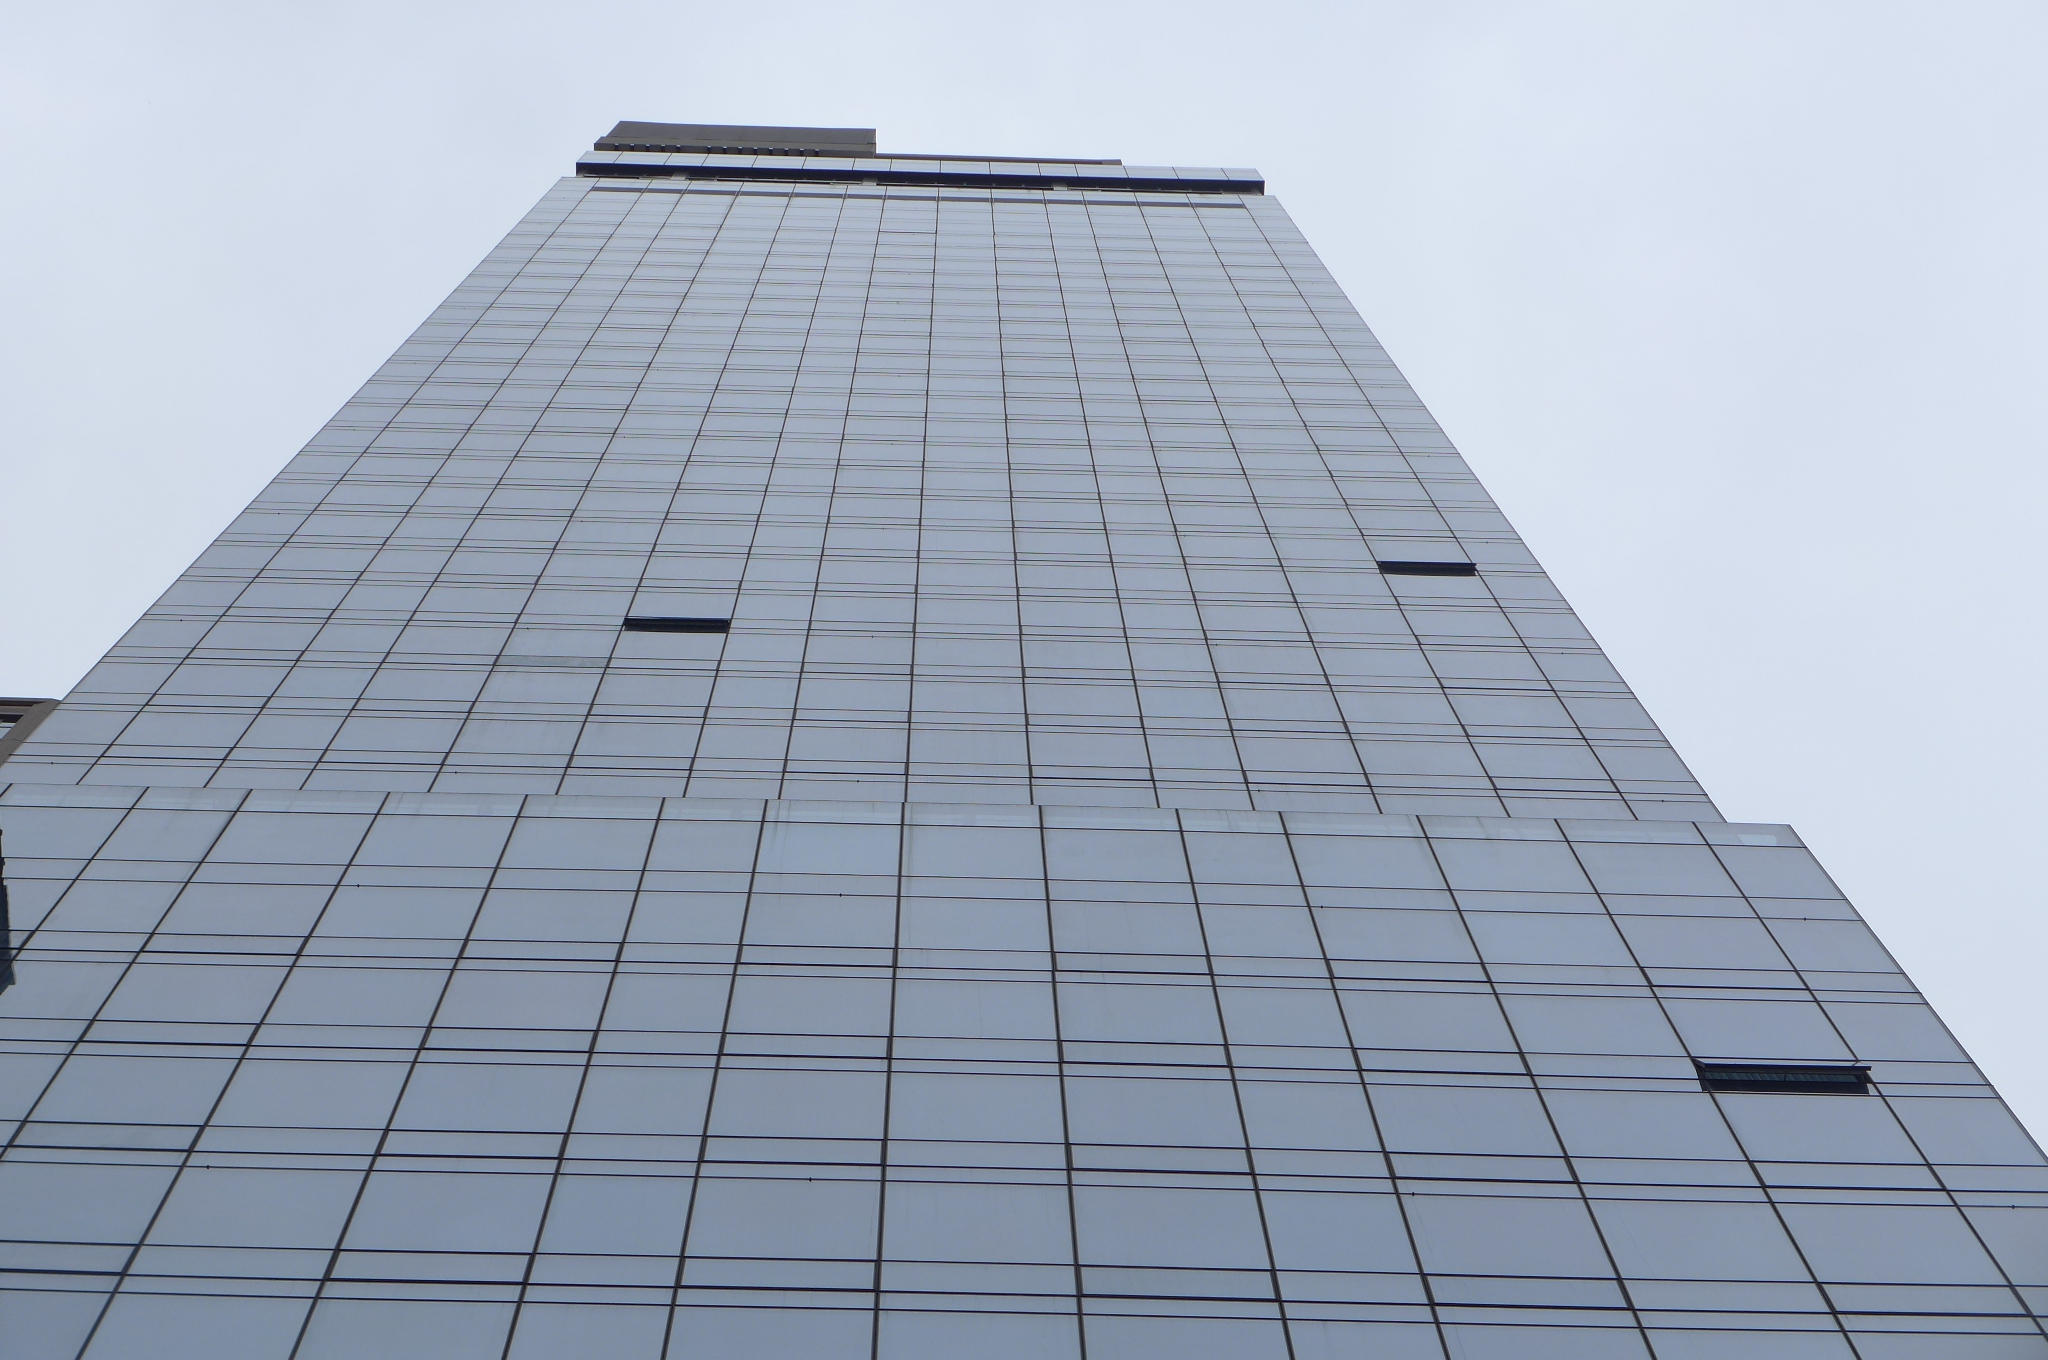 A tall, dark-windowed building stands against a gray sky